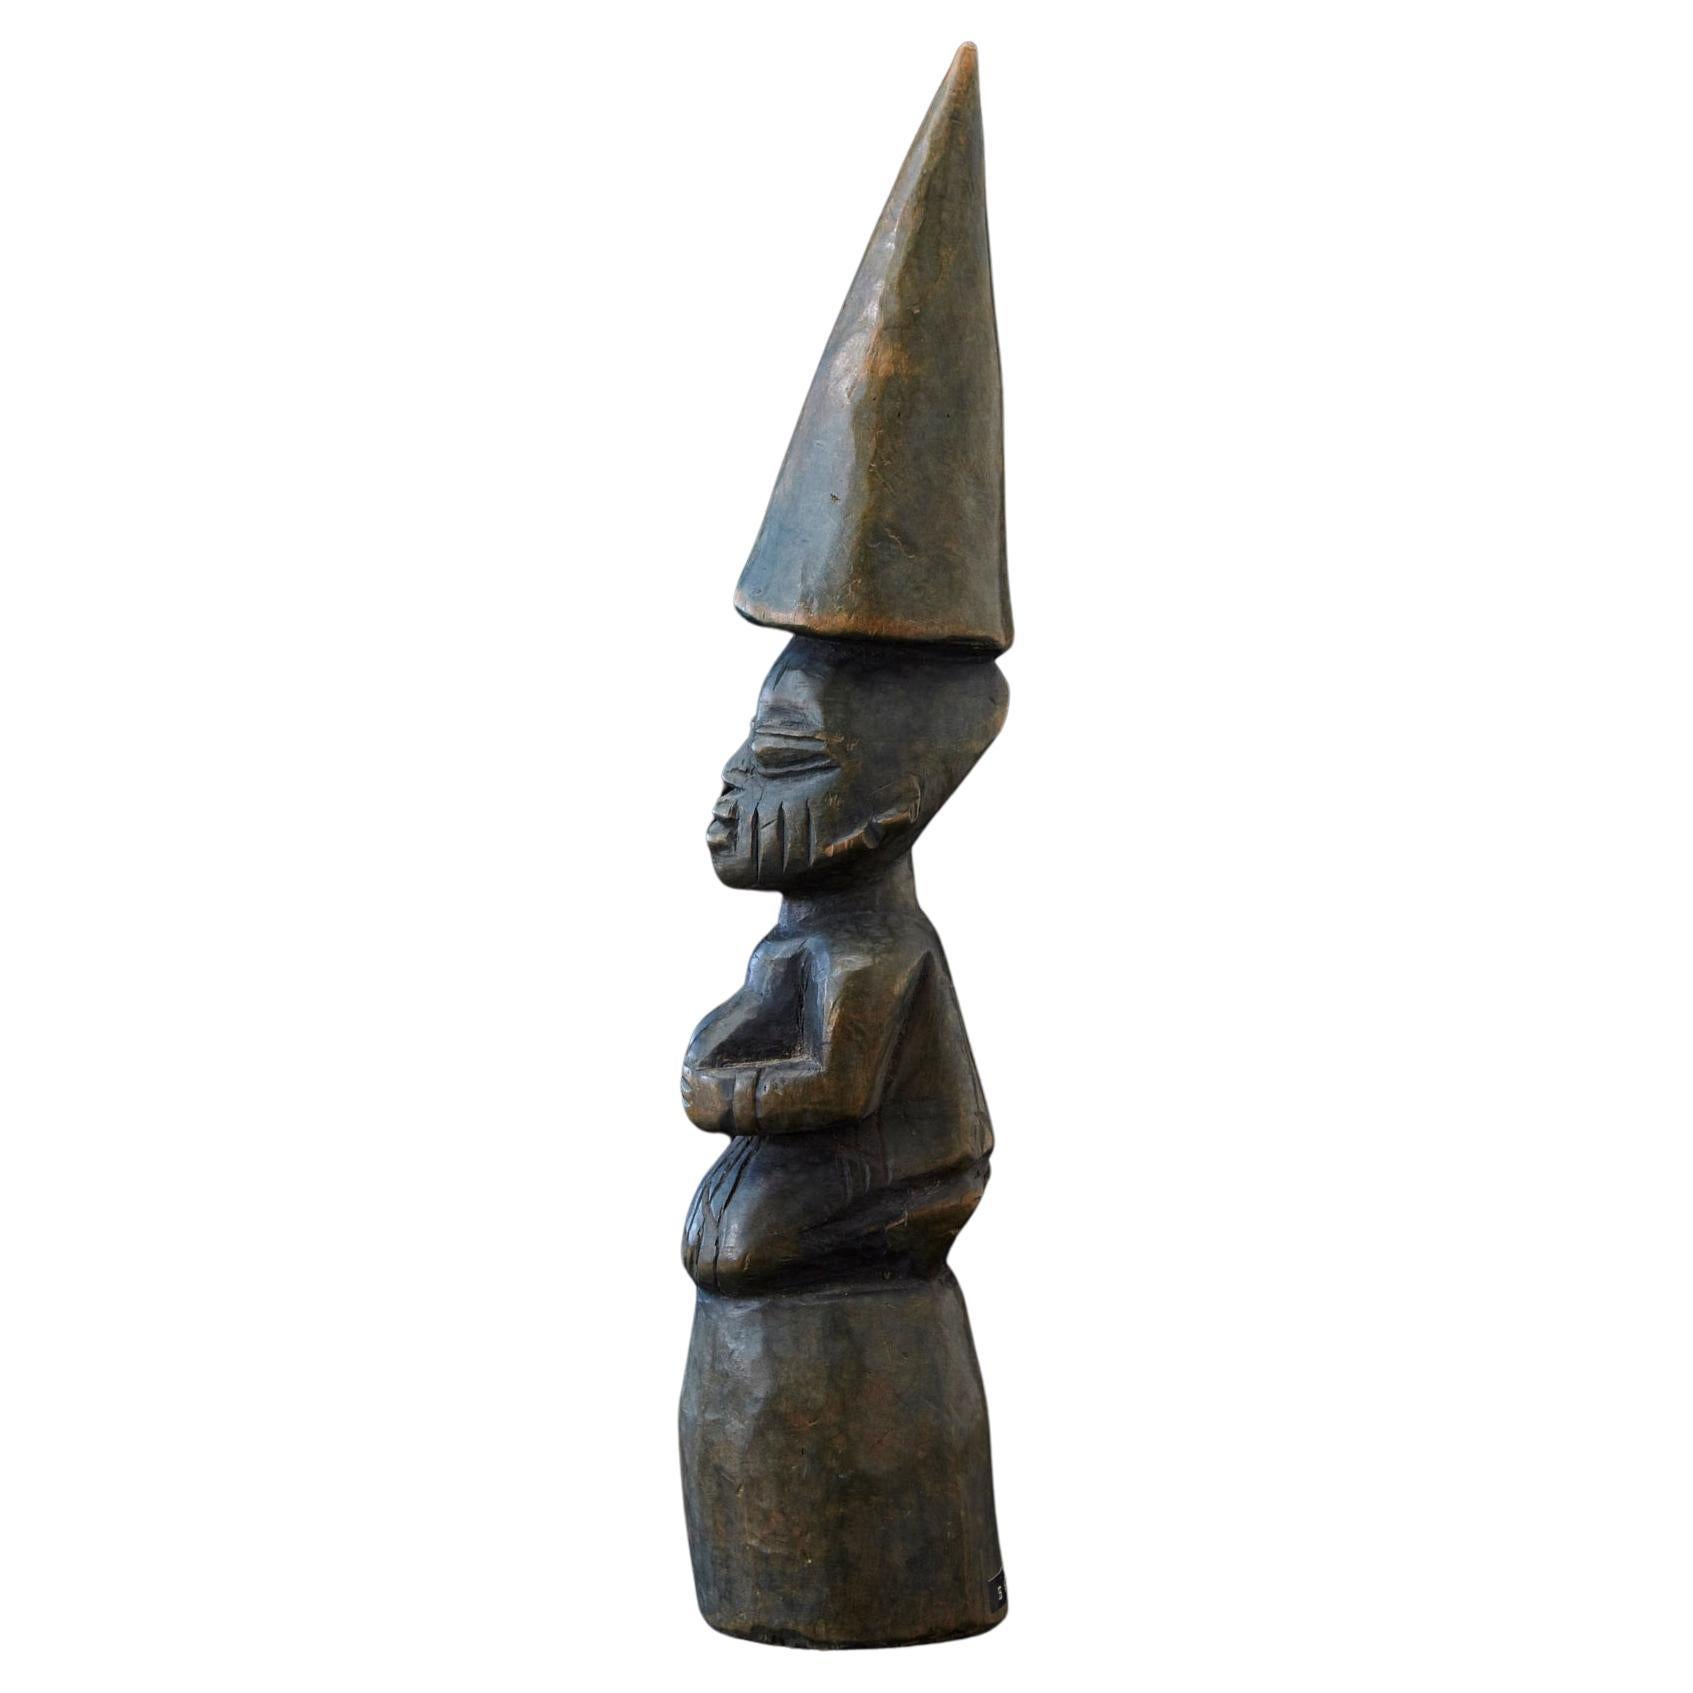 Tall Carved Wooden Oracle or Divination Tapper "Iroke Ifa", Yoruba People, 1930s